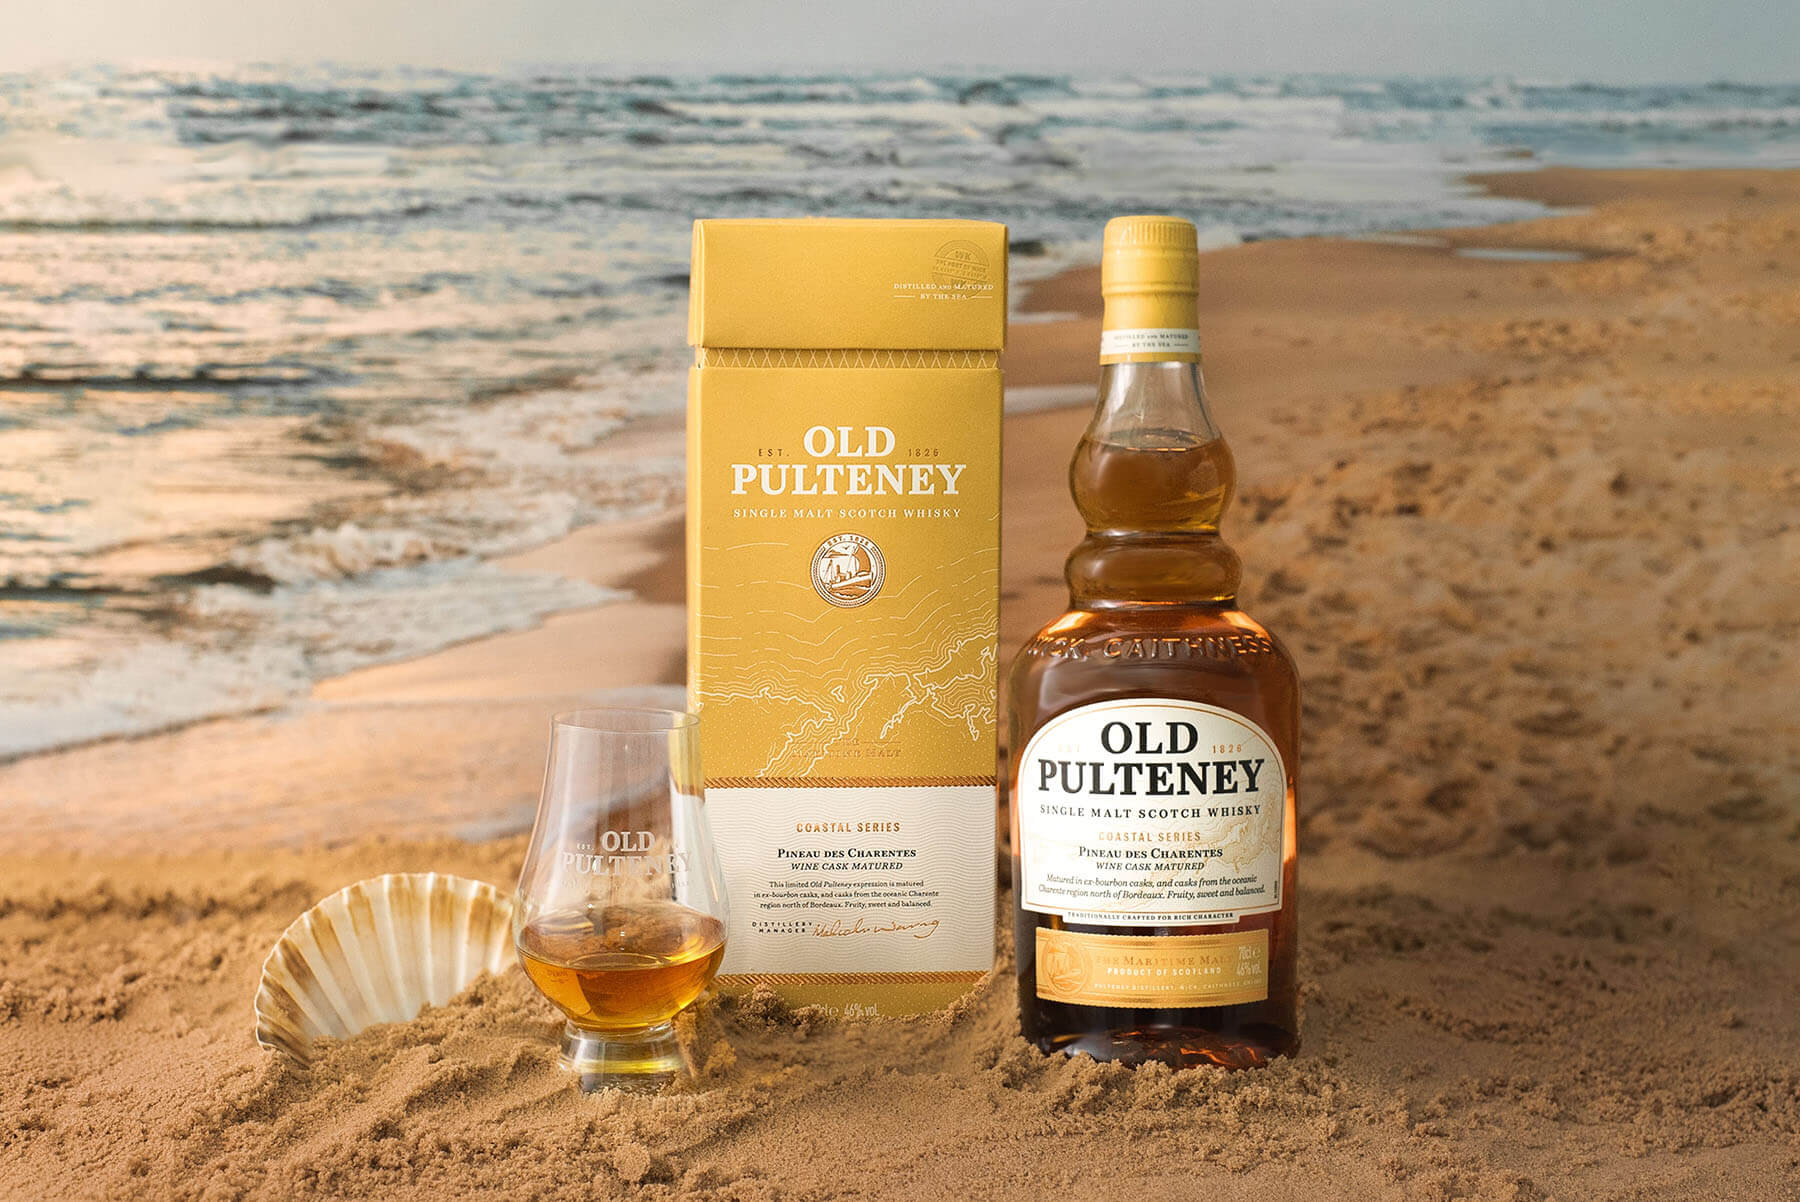 Introducing the Old Pulteney Coastal Series